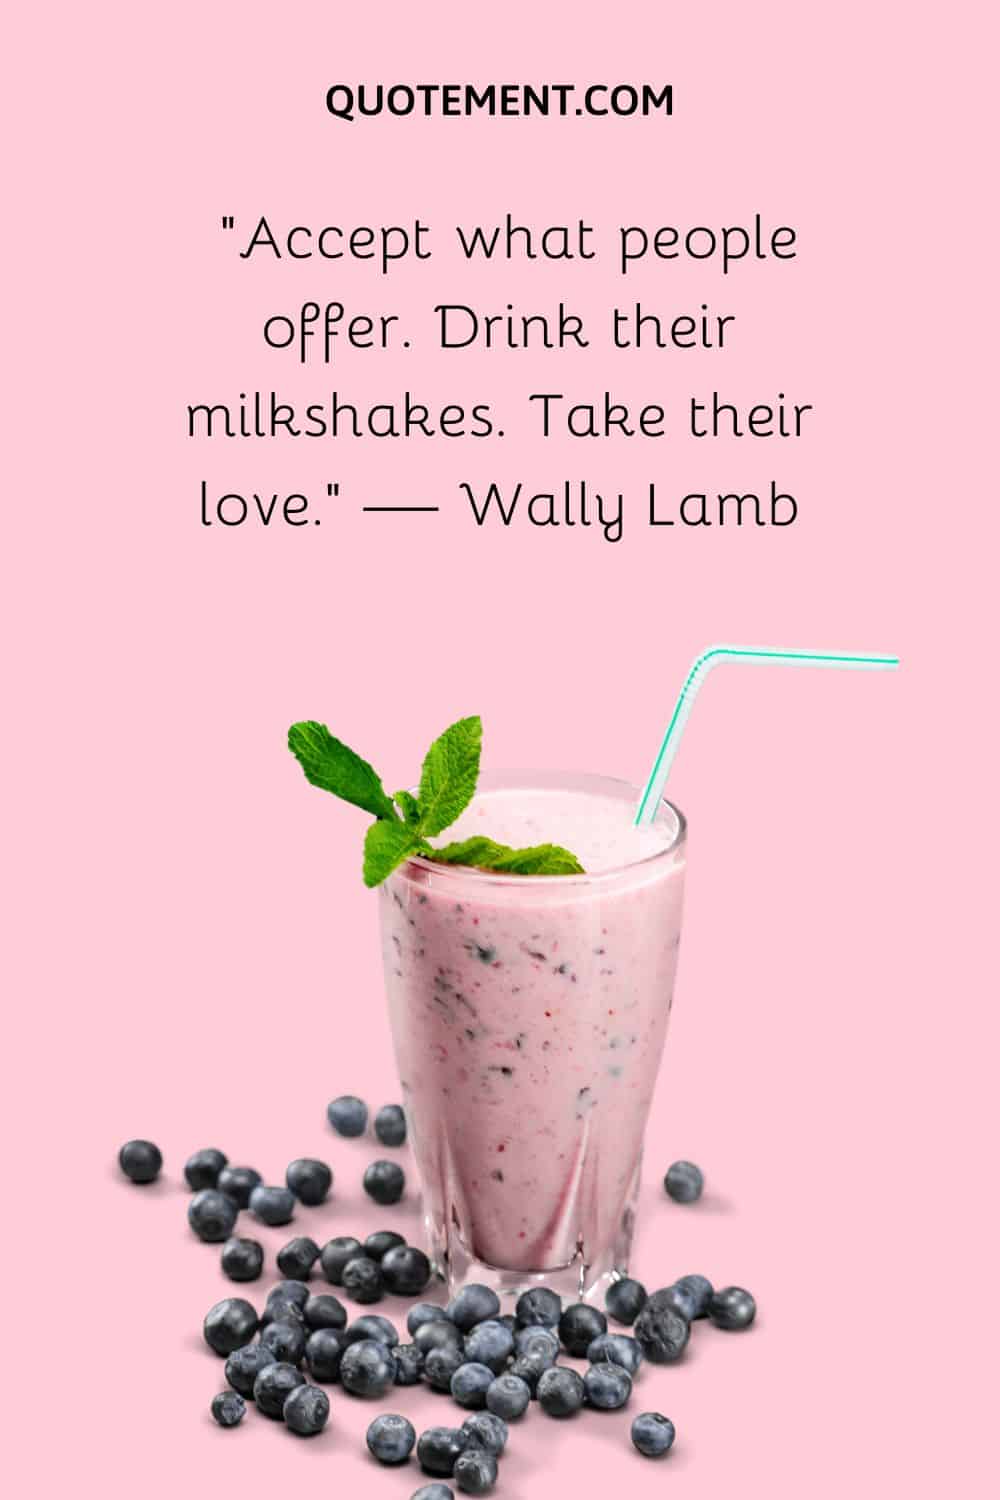 Accept what people offer. Drink their milkshakes. Take their love. — Wally Lamb